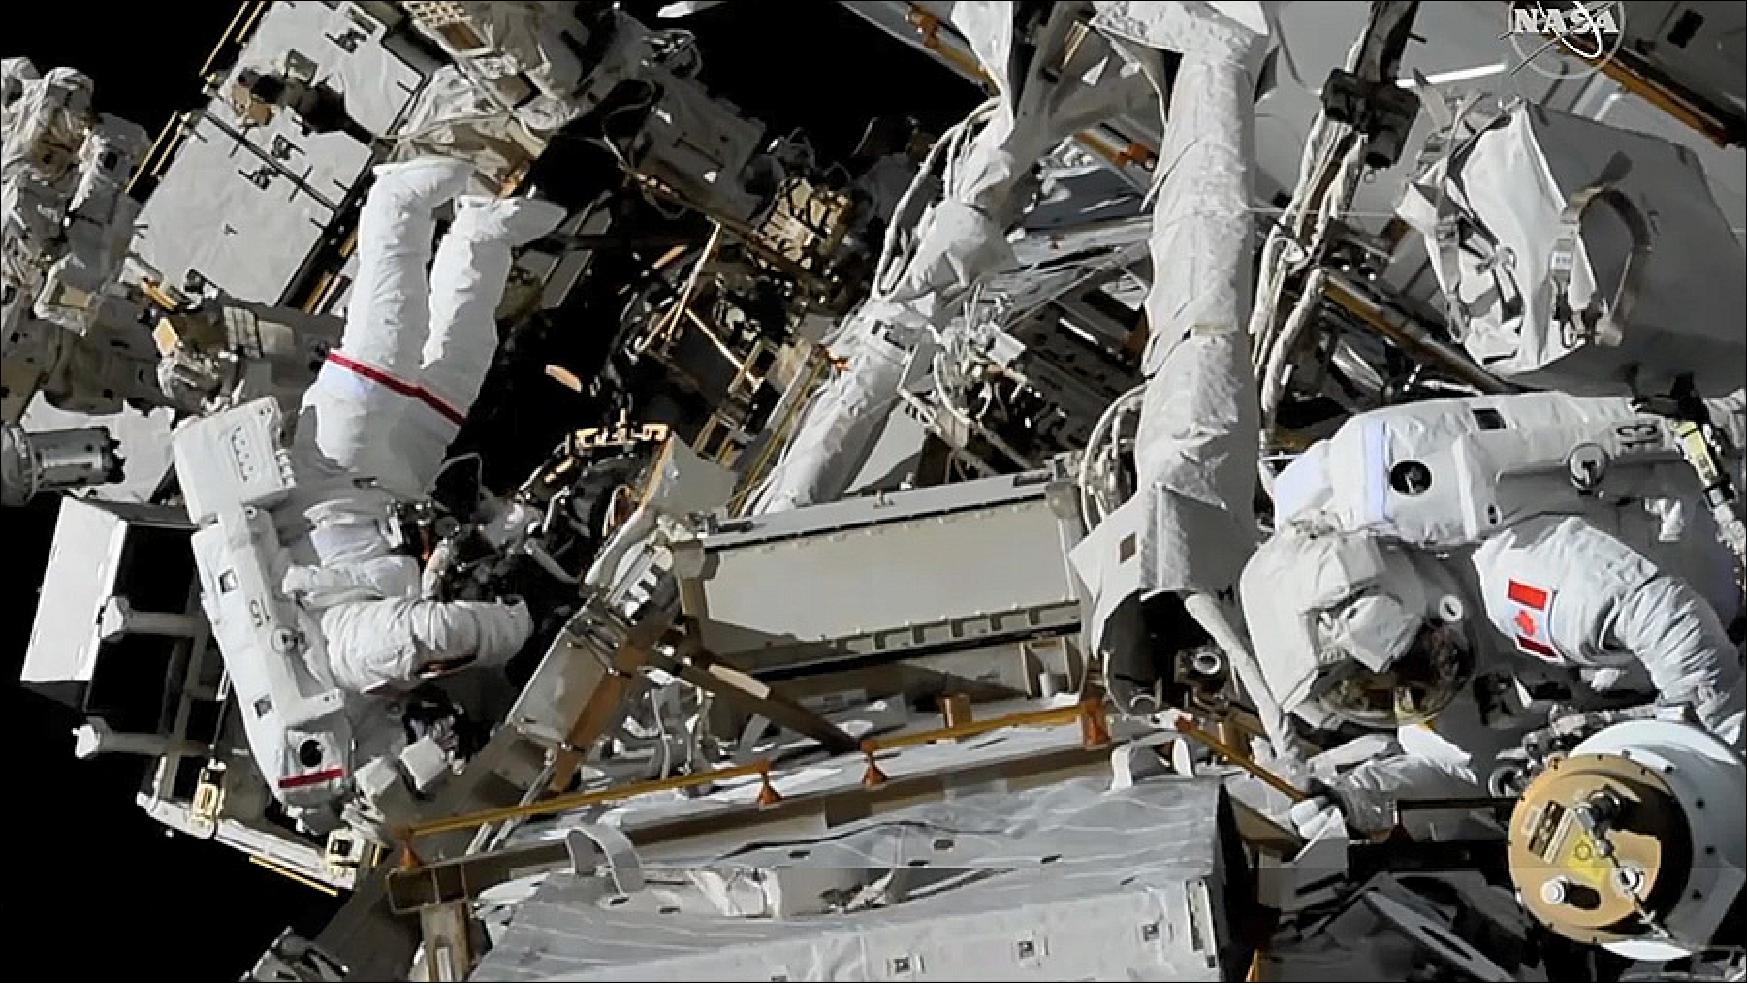 Figure 97: Astronauts Anne McClain (left) and David Saint-Jacques work outside the International Space Station during their spacewalk on April 8, 2019 (image credit: NASA)